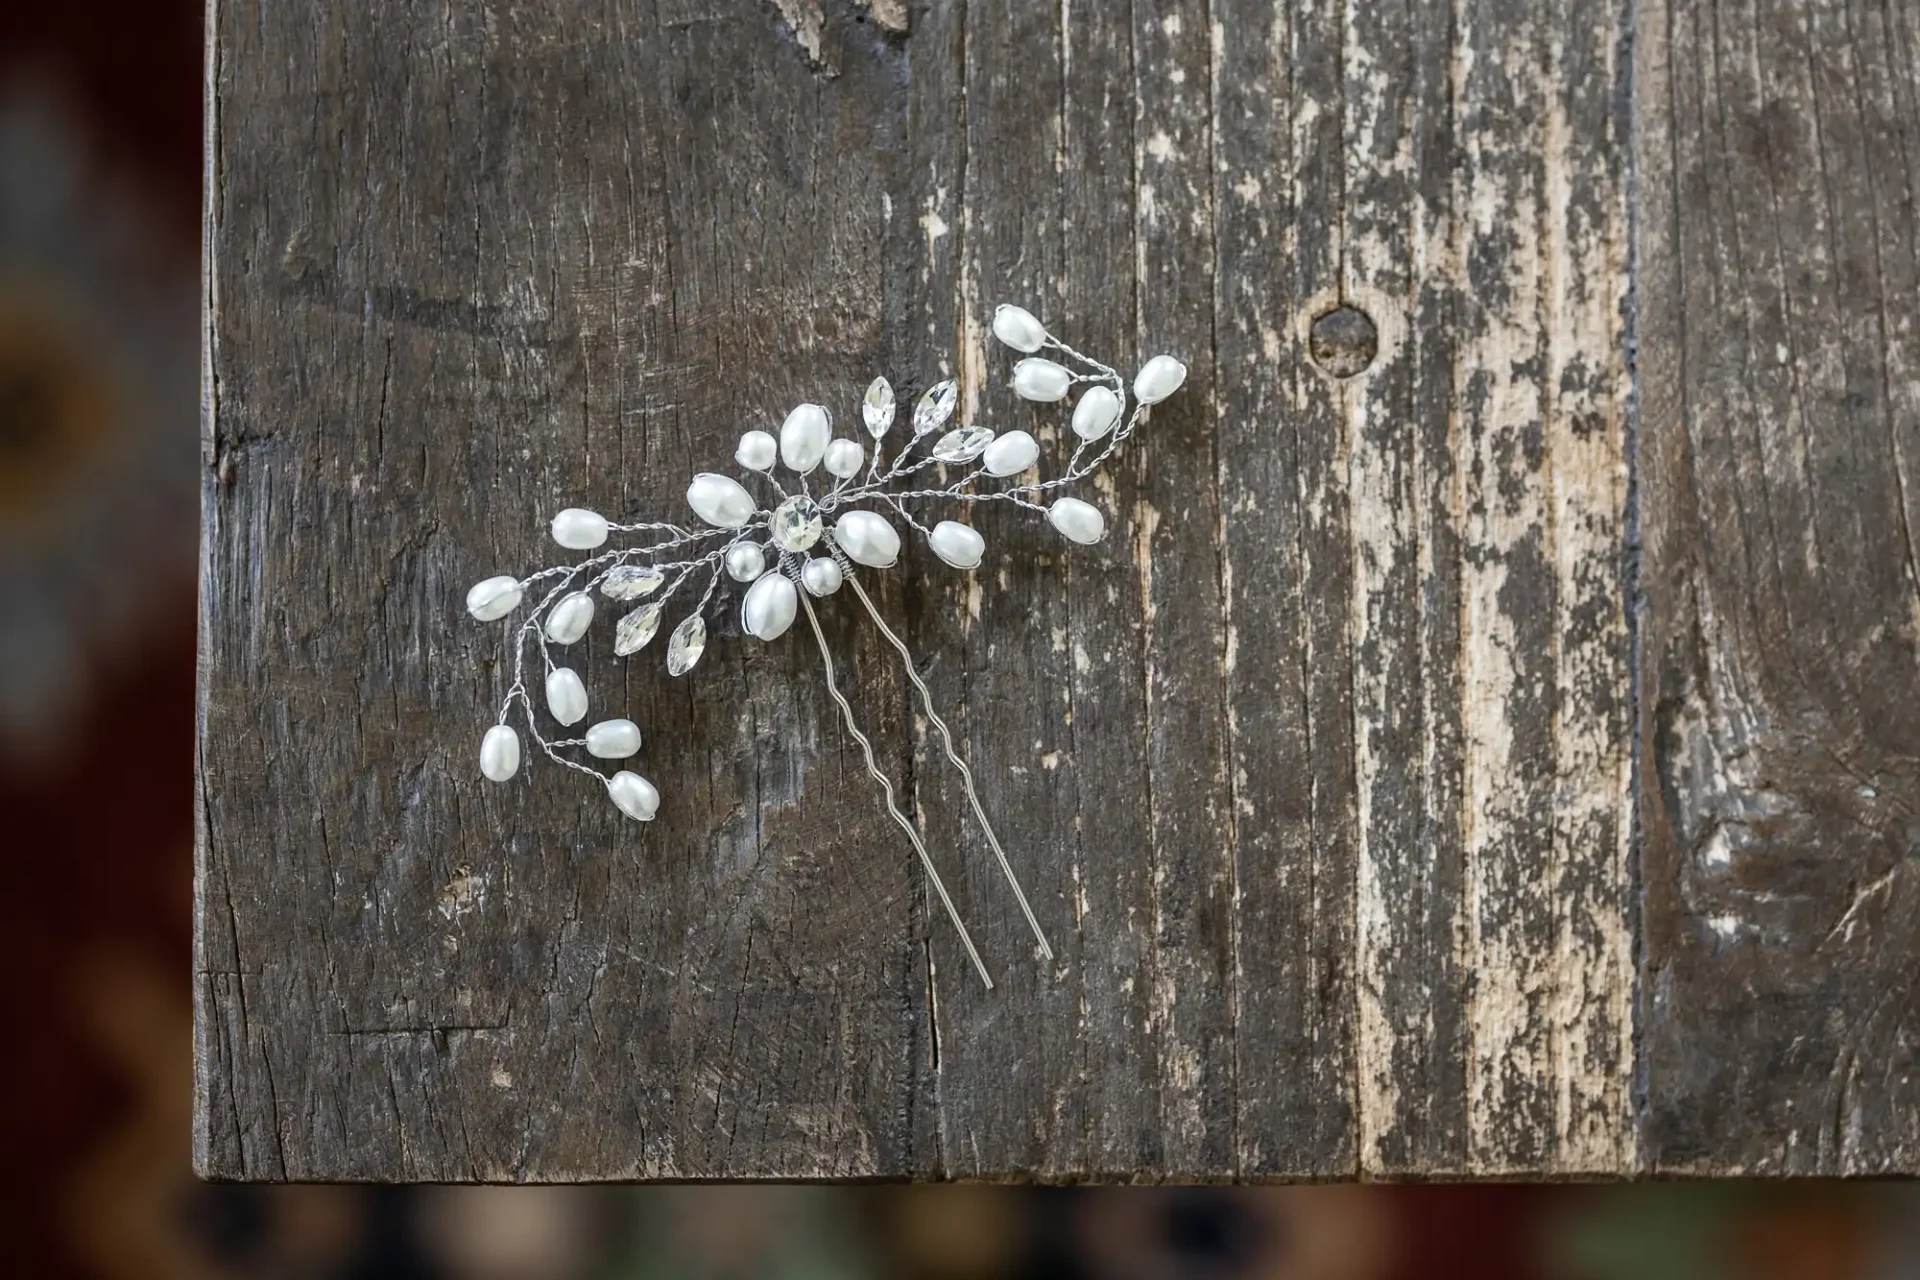 A decorative white floral hairpin resting on a weathered wooden surface.